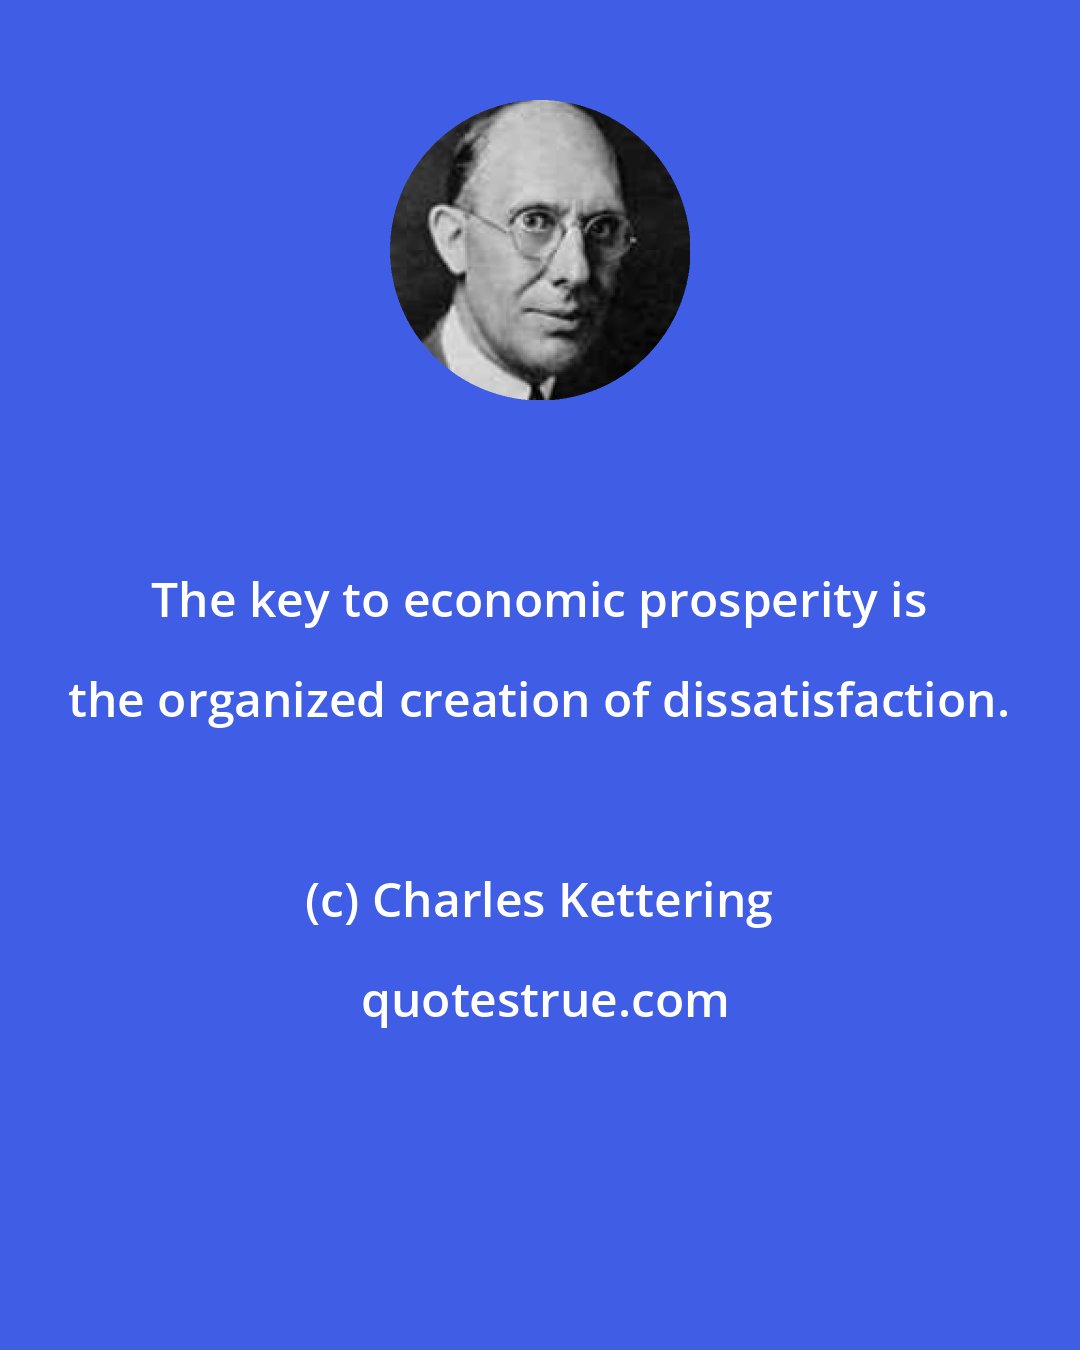 Charles Kettering: The key to economic prosperity is the organized creation of dissatisfaction.